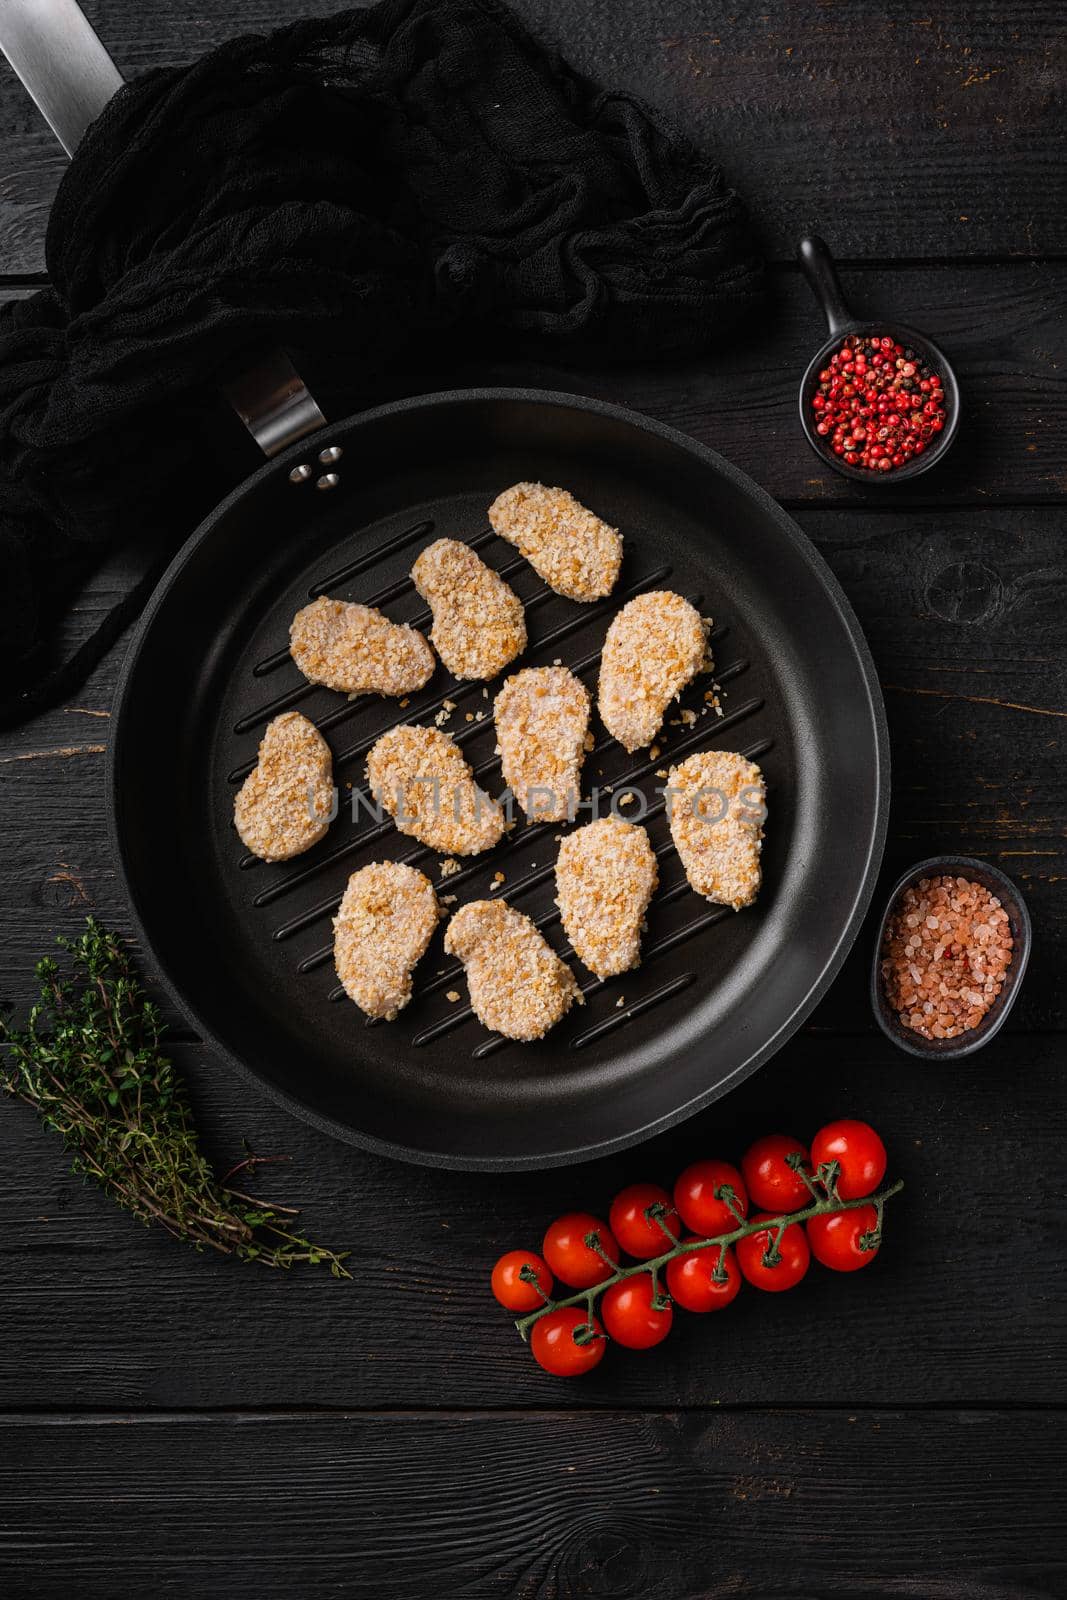 Instant food raw chicken nuggets ready for cooking, on black wooden table background, top view flat lay